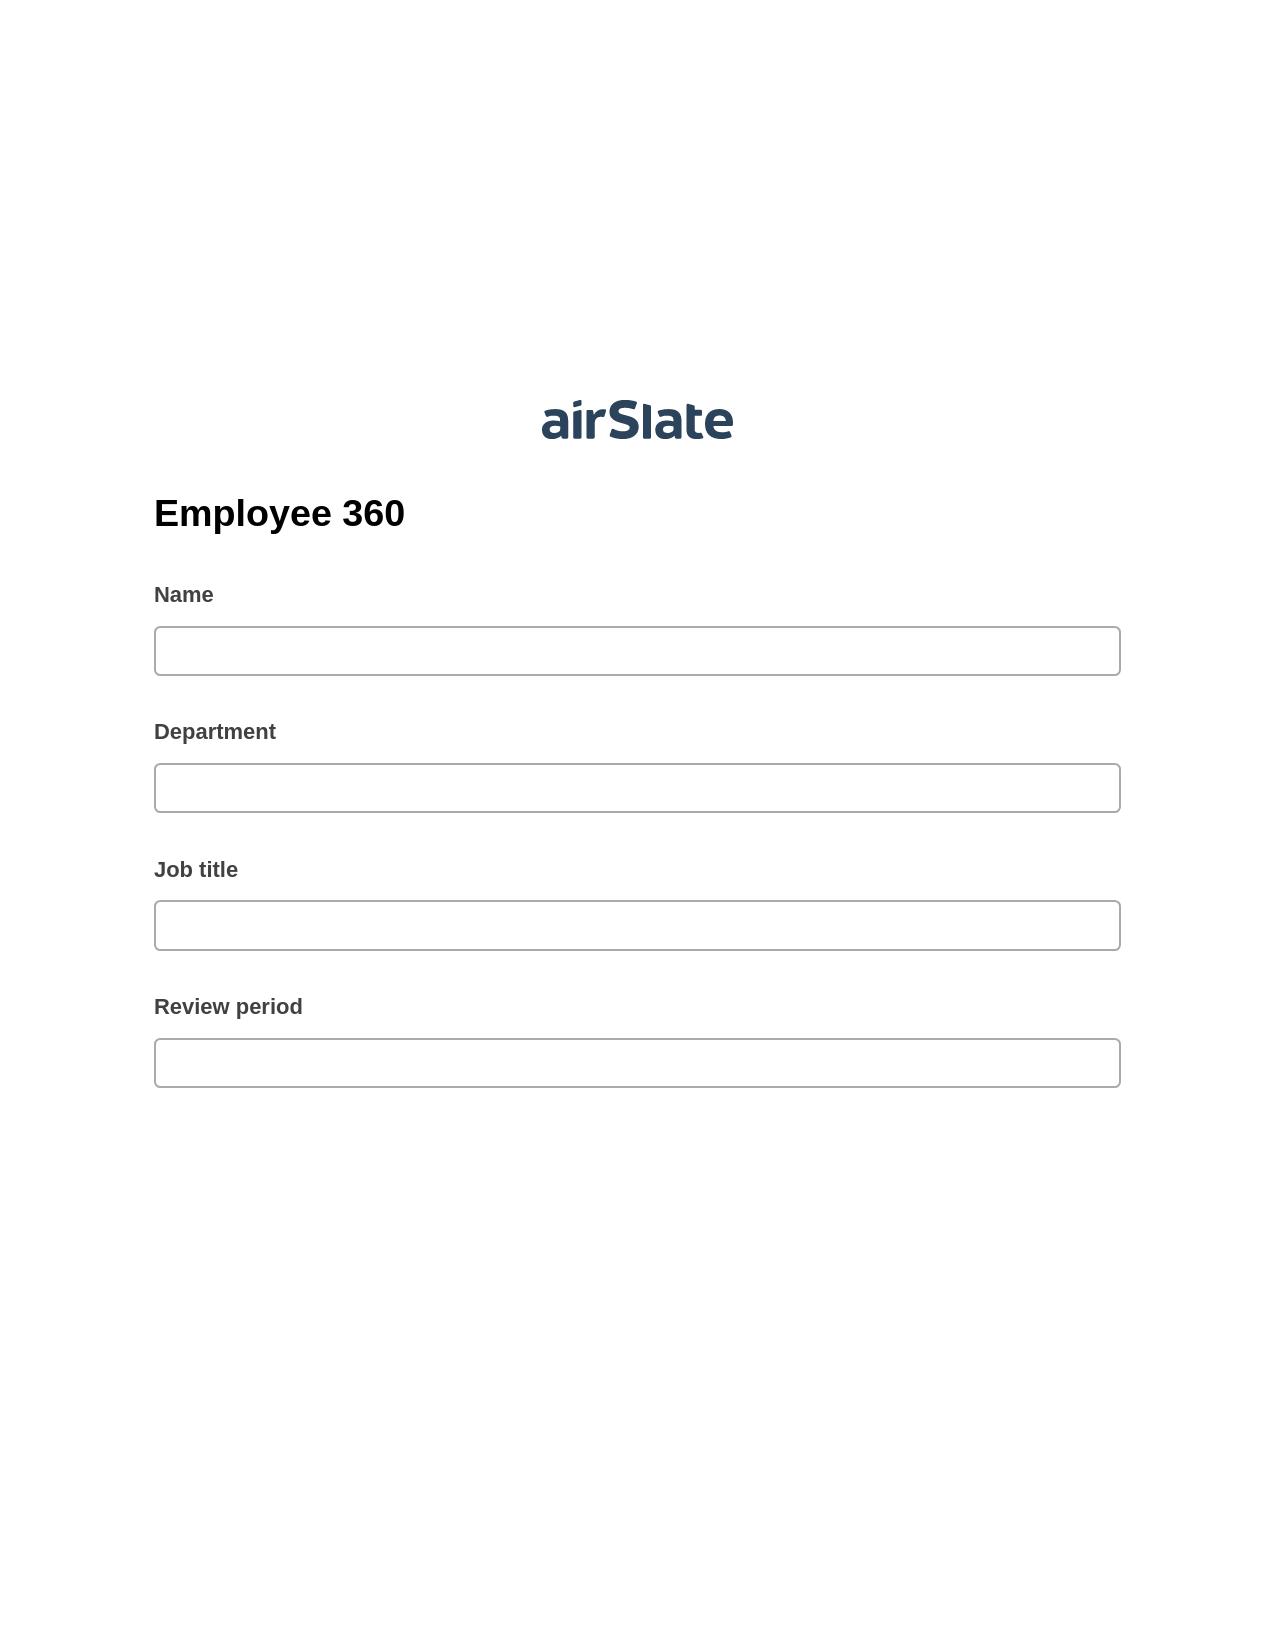 Multirole Employee 360 Pre-fill from CSV File Bot, Create QuickBooks Invoice Bot, Archive to Box Bot